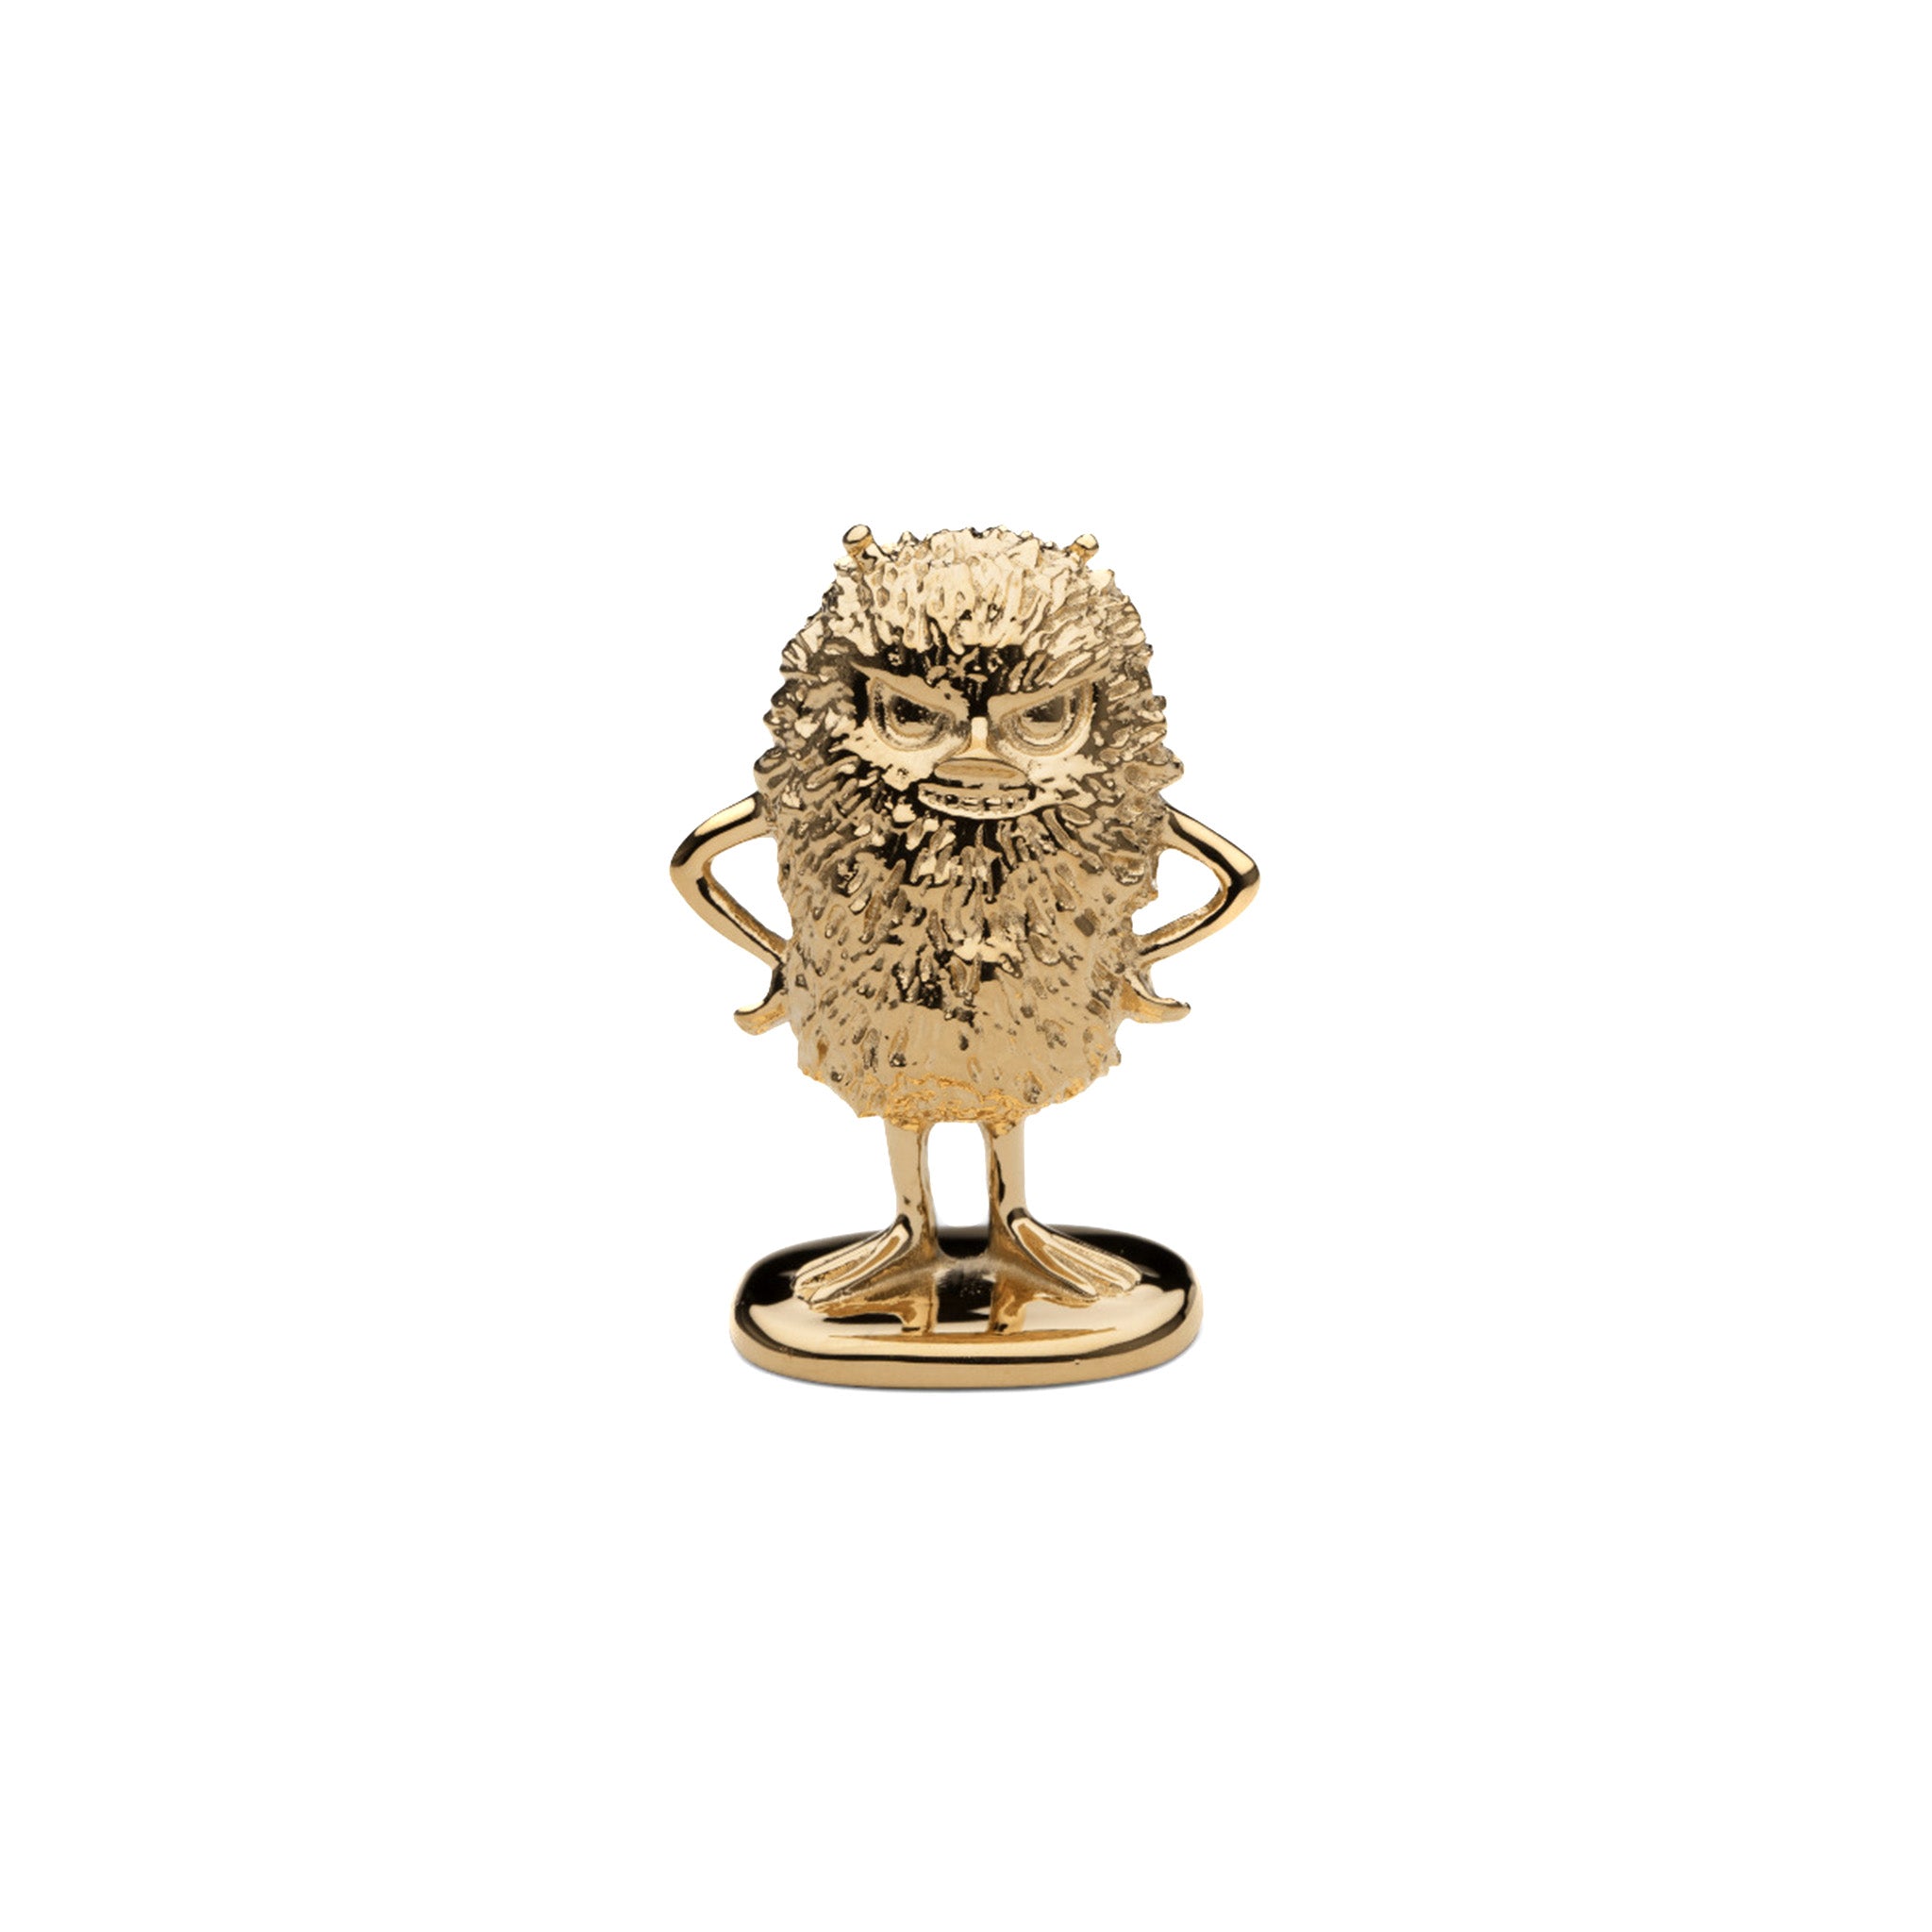 a gold figurine of moomin stinky facing forward on a white background